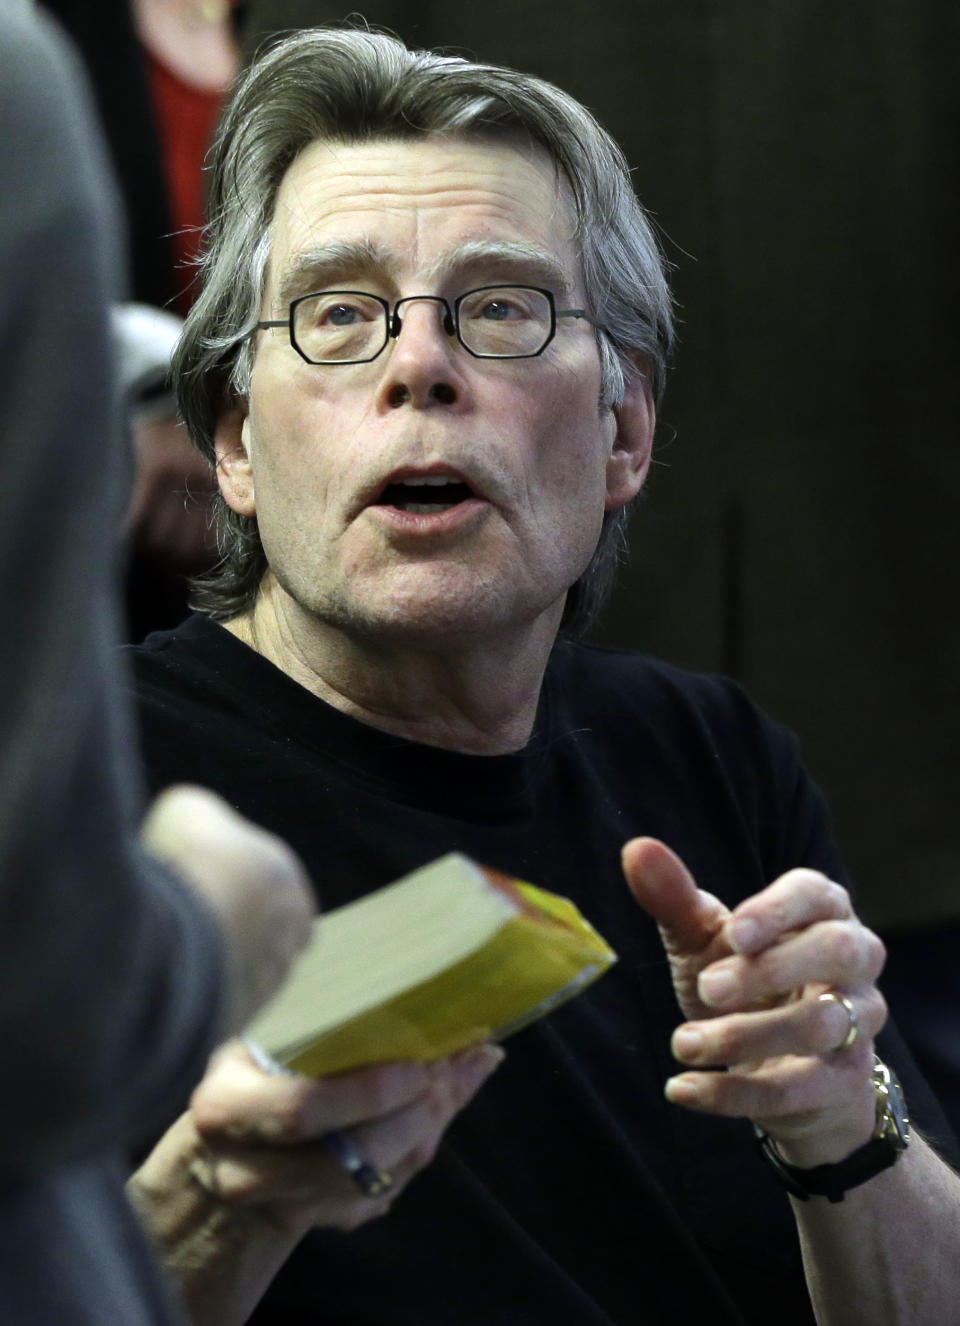 Novelist Stephen King hands back a book after signing it for a student at the University of Massachusetts-Lowell in Lowell, Mass., Friday, Dec. 7, 2012. (AP Photo/Elise Amendola)